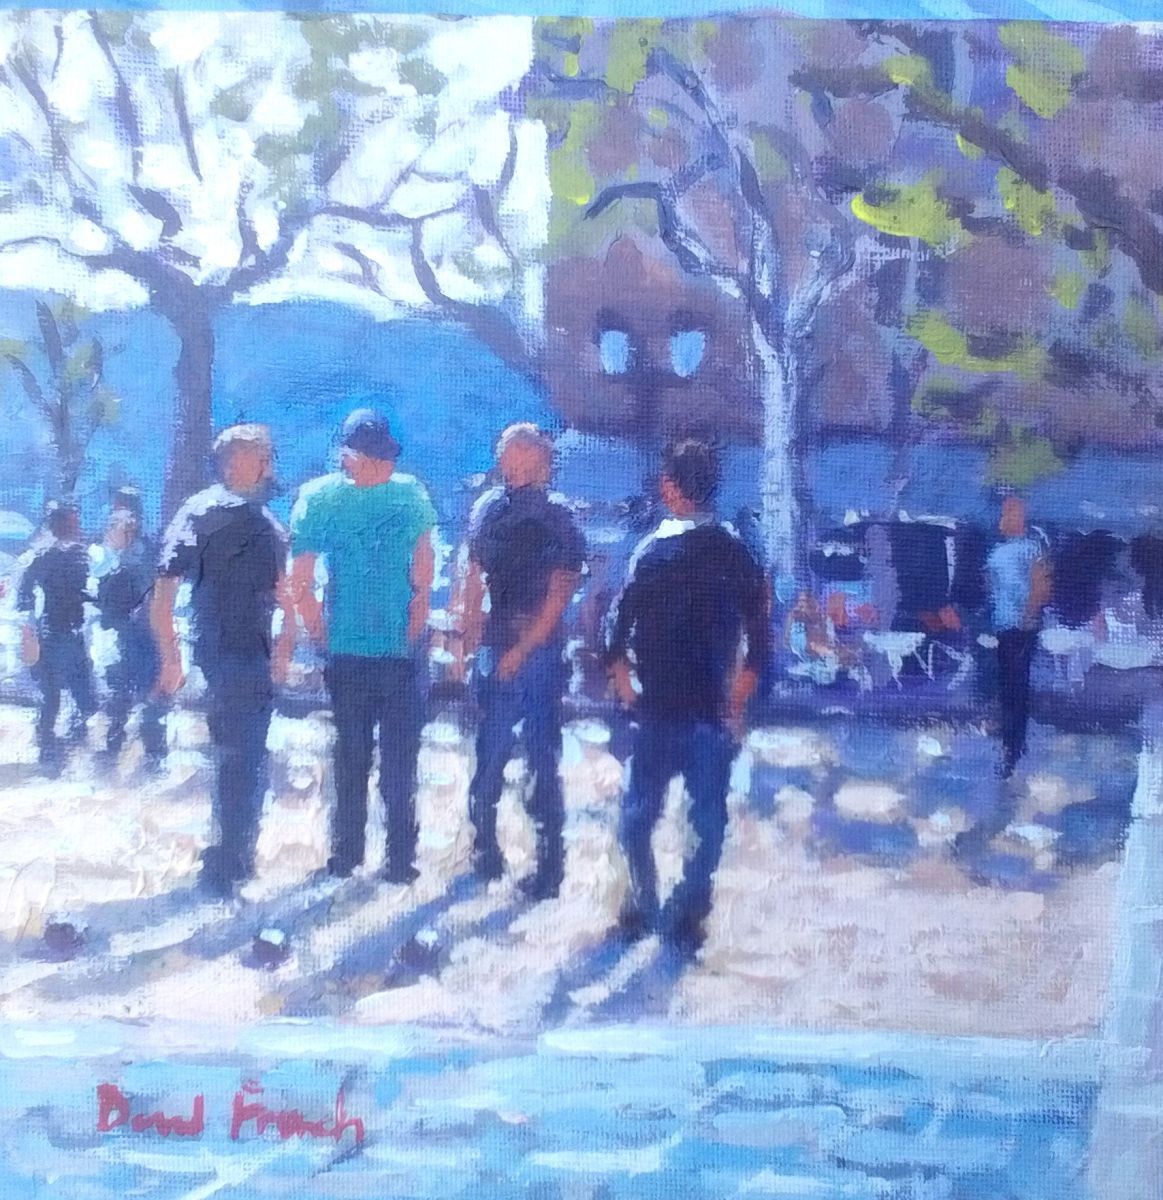 Boules in Saint-Florent by David French